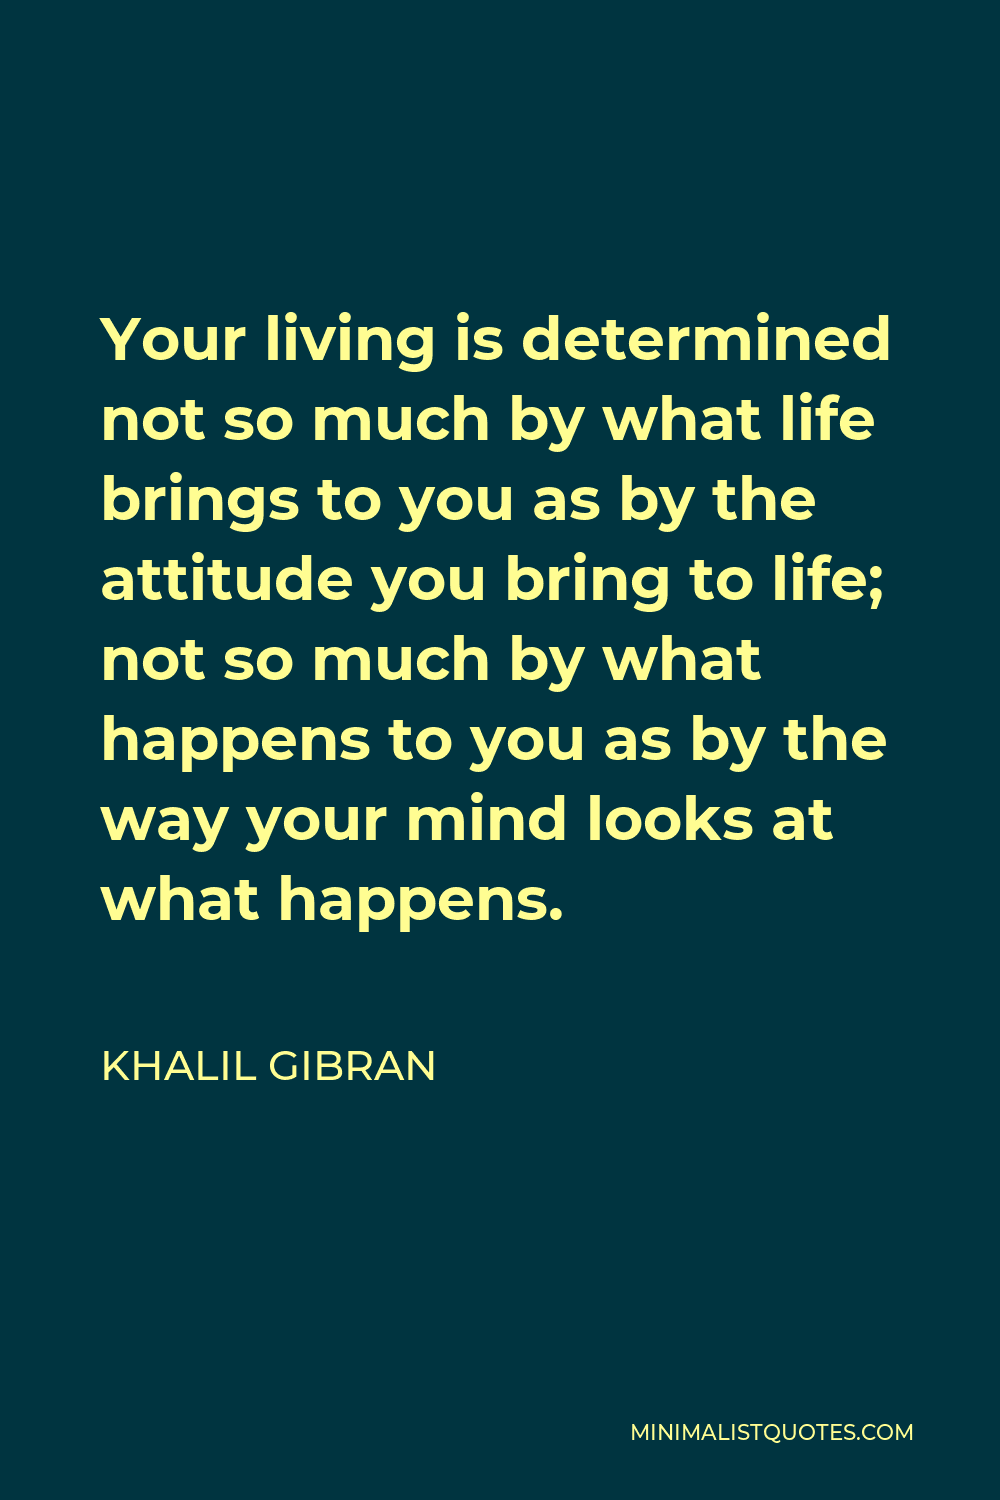 Khalil Gibran Quote - Your living is determined not so much by what life brings to you as by the attitude you bring to life; not so much by what happens to you as by the way your mind looks at what happens.